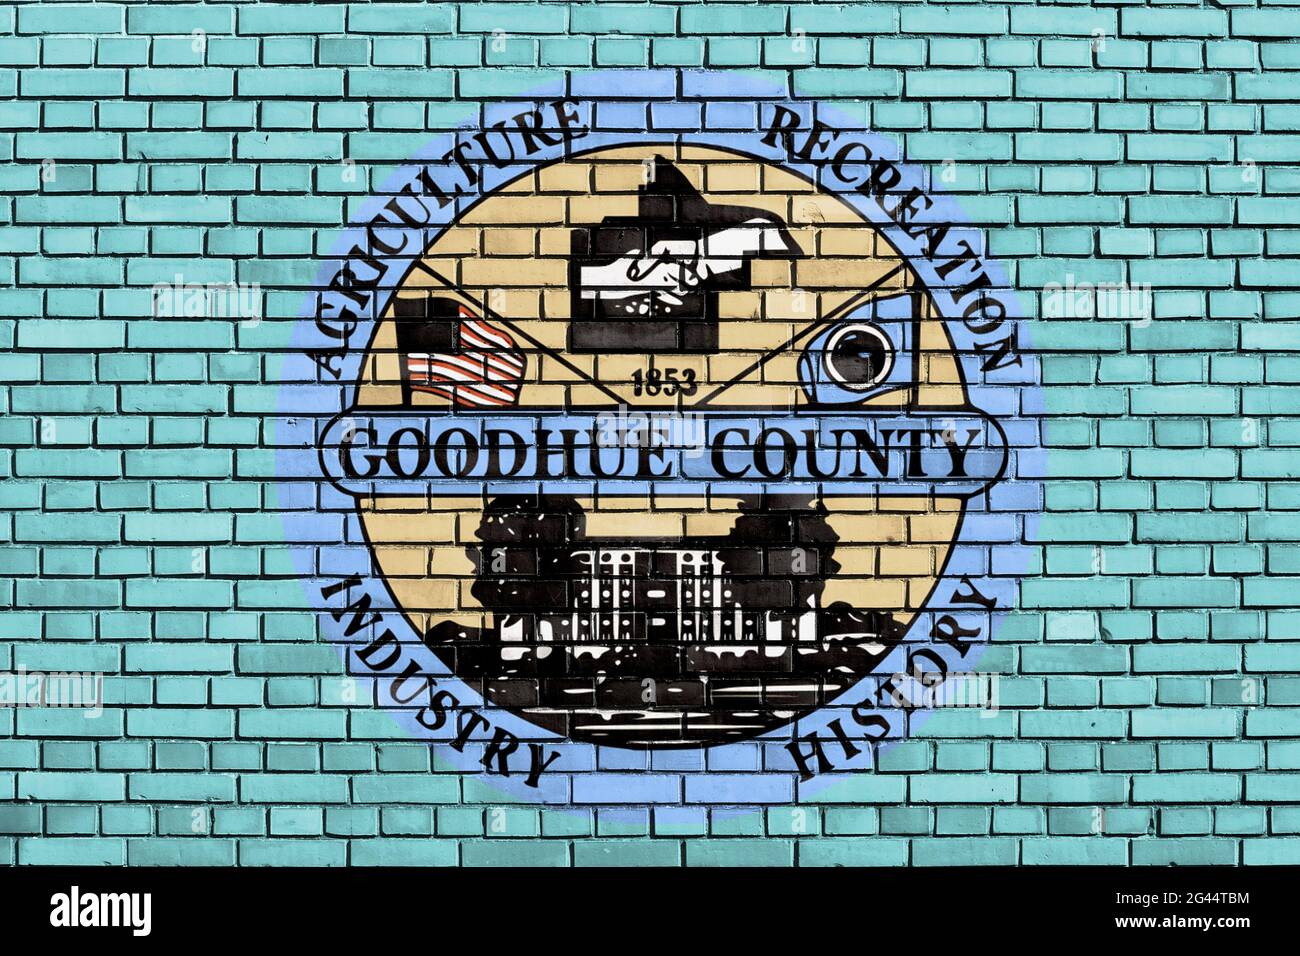 Flag of Goodhue County, Minnesota painted on brick wall Stock Photo